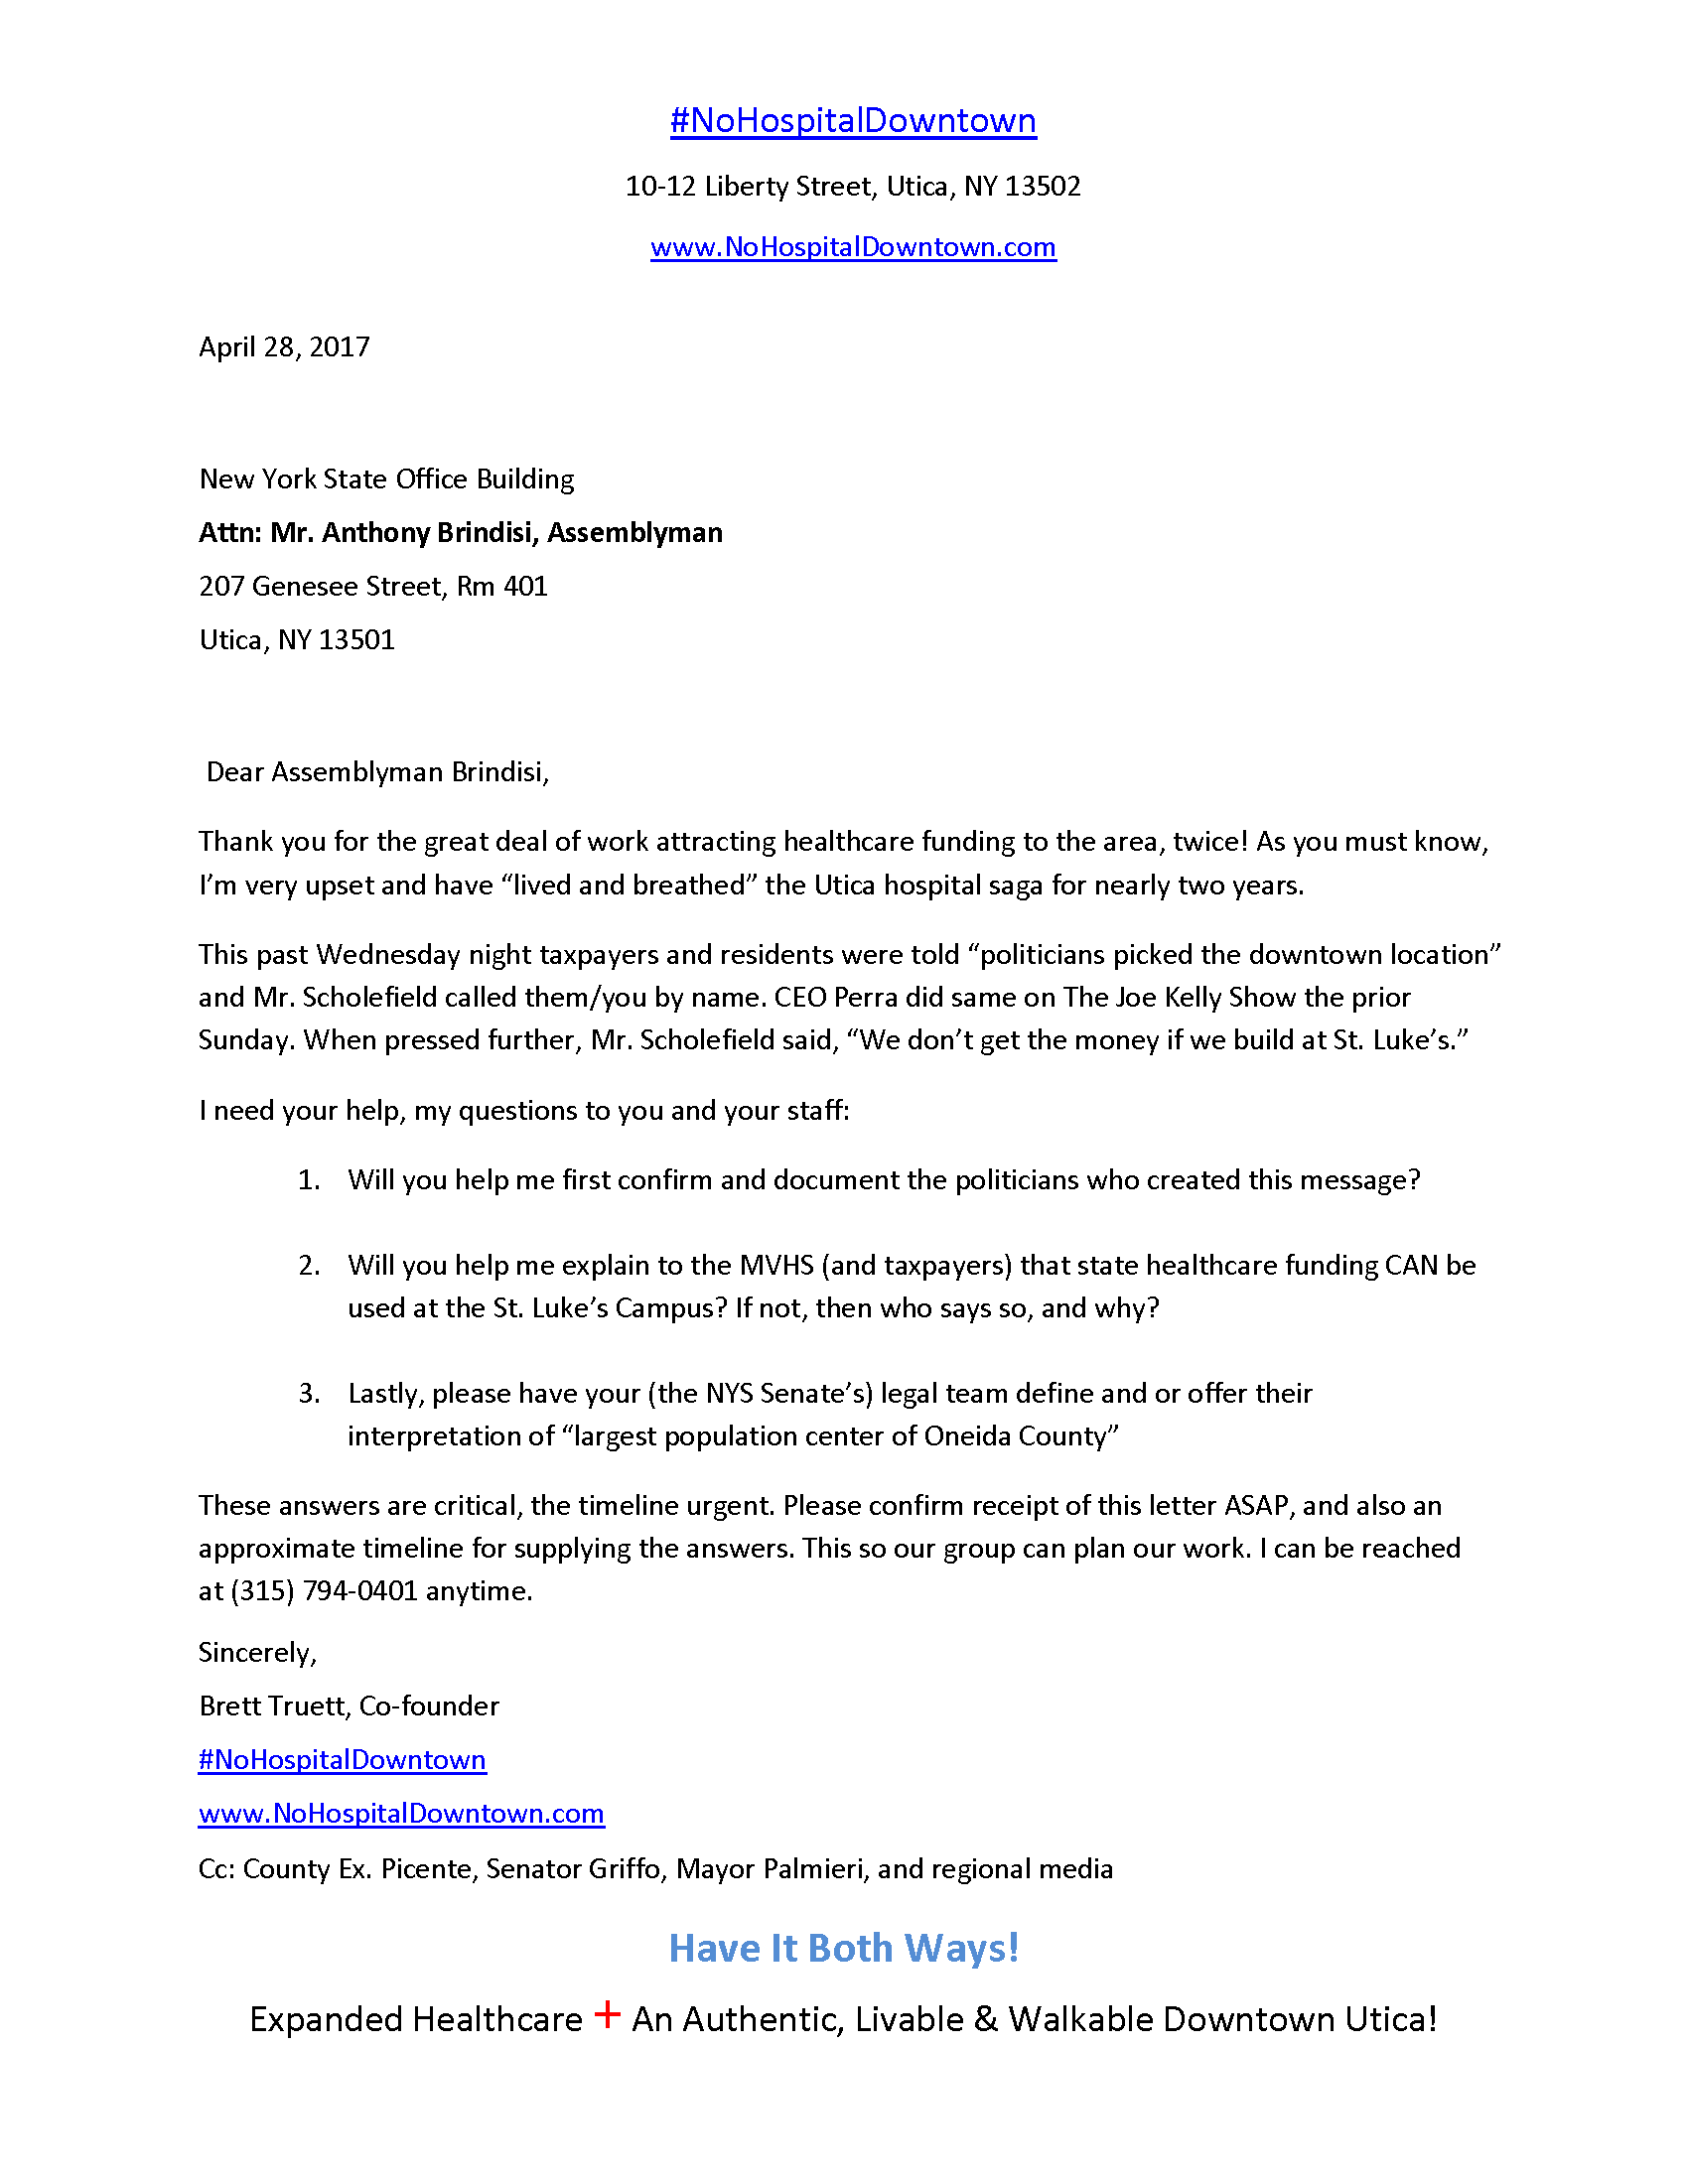 Sample Letter To Senator About Health Care 7